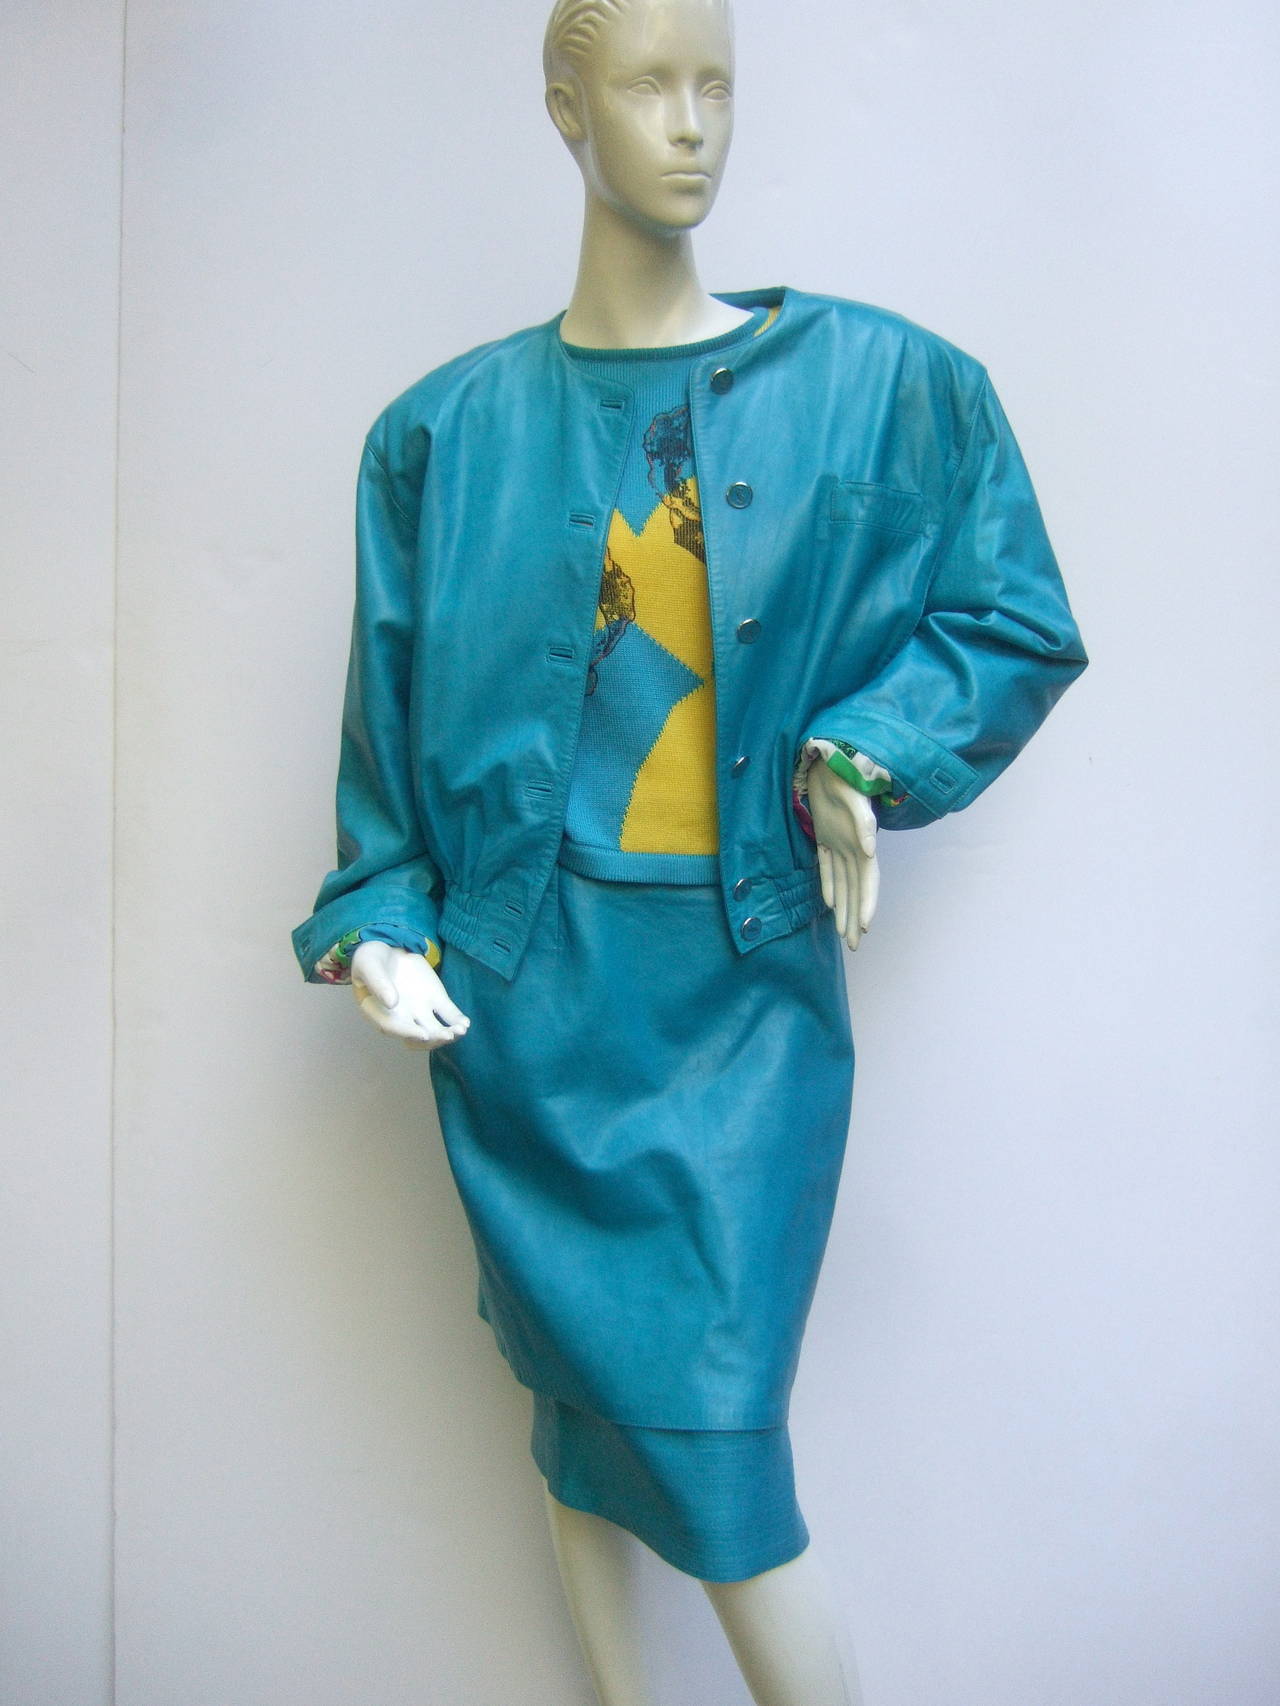 Louis Feraud Turquoise Leather Andy Warhol Inspired Skirt Suit c 1980s 1